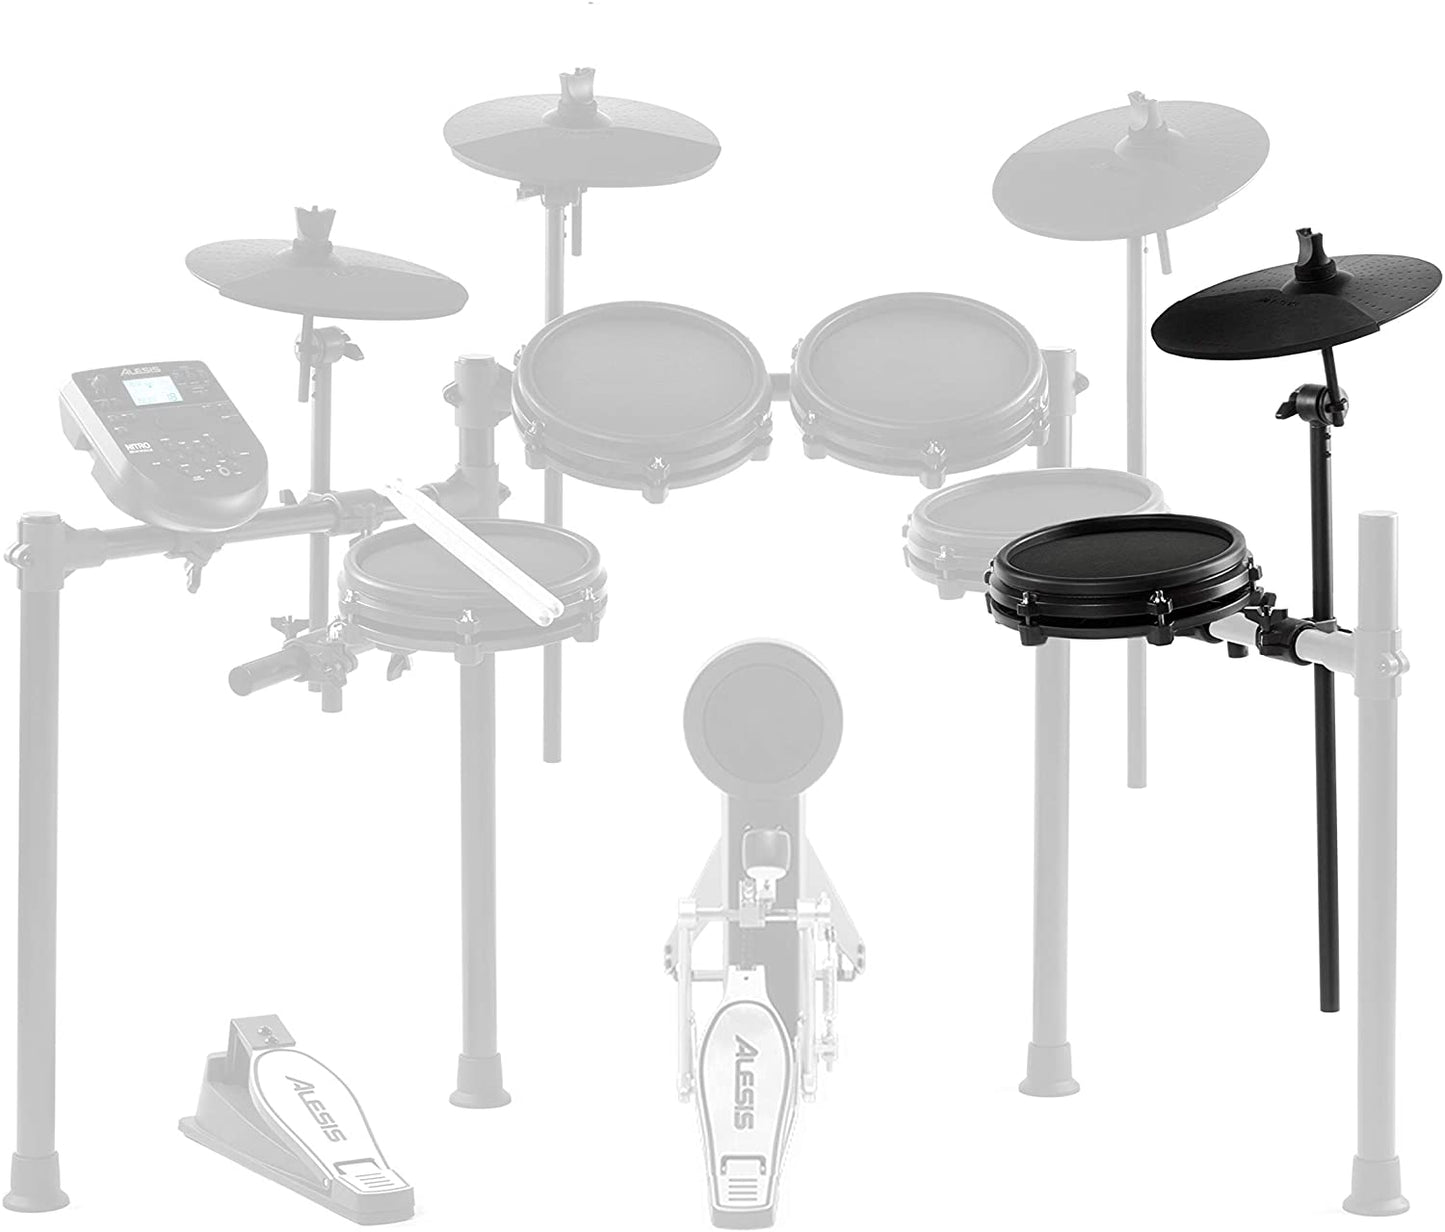 Alesis Nitro Mesh Kit Expansion Pack with 10-inch Cymbal and 8-inch Dual-zone Mesh Drum Pad